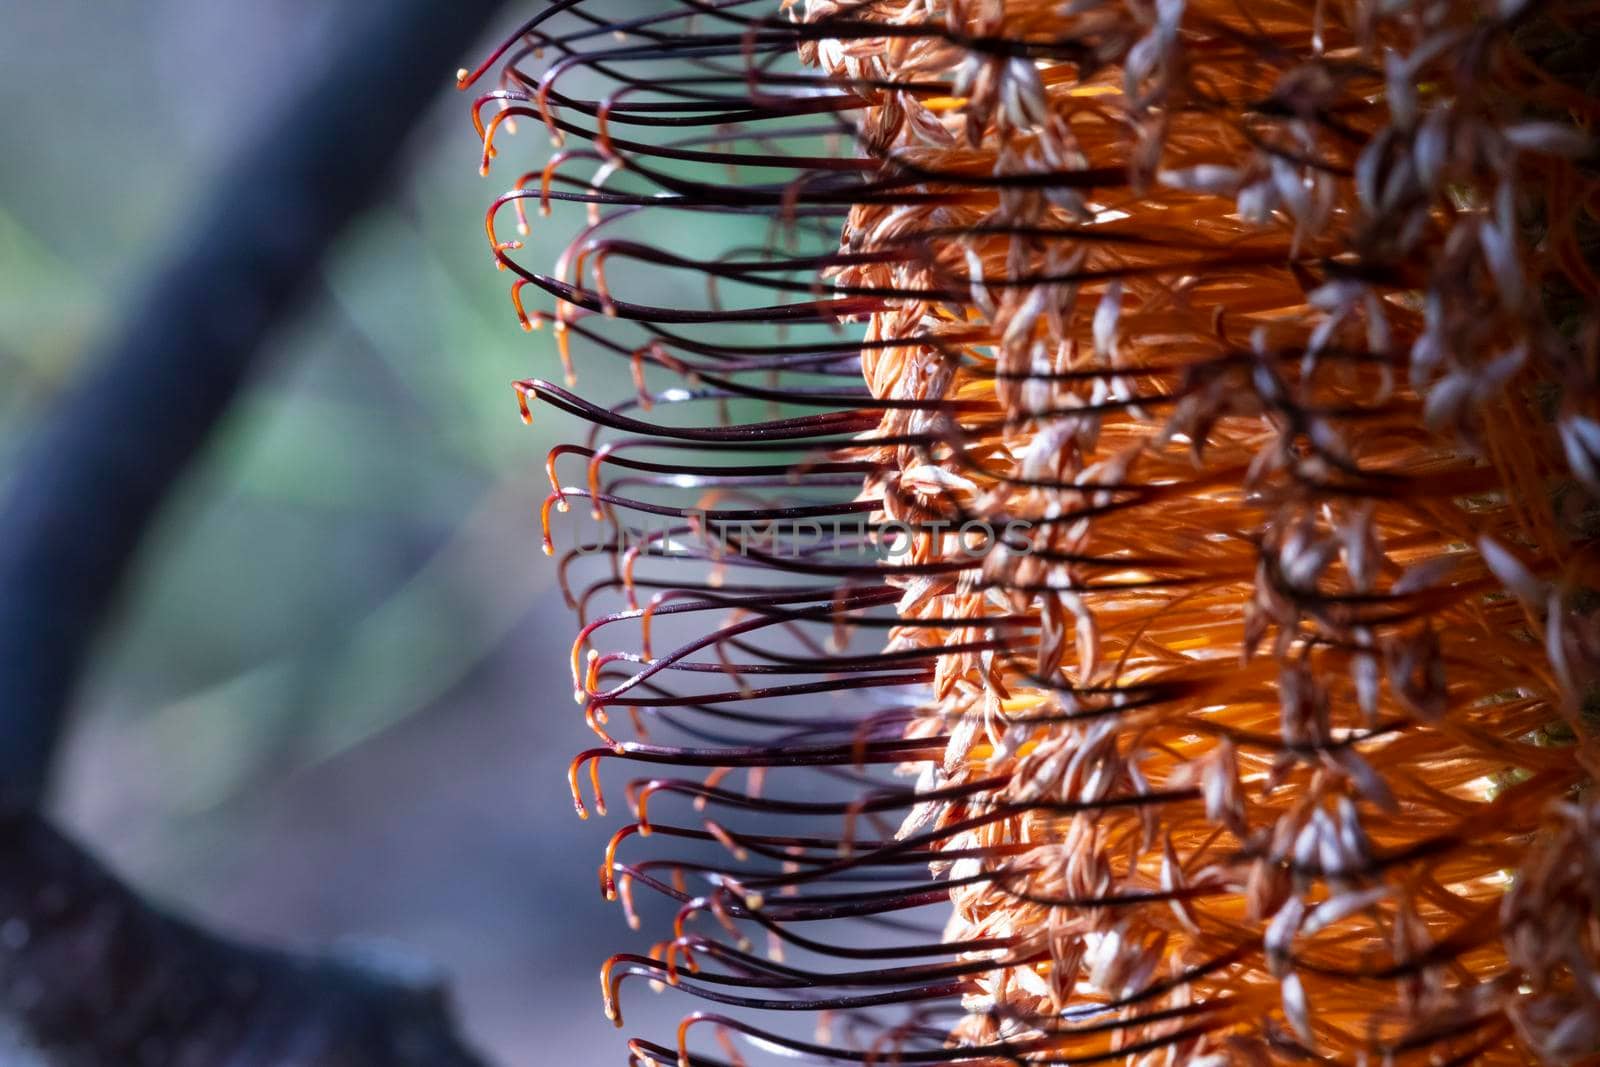 Photograph of a Banksia flower sprouting after bushfires in regional Australia by WittkePhotos